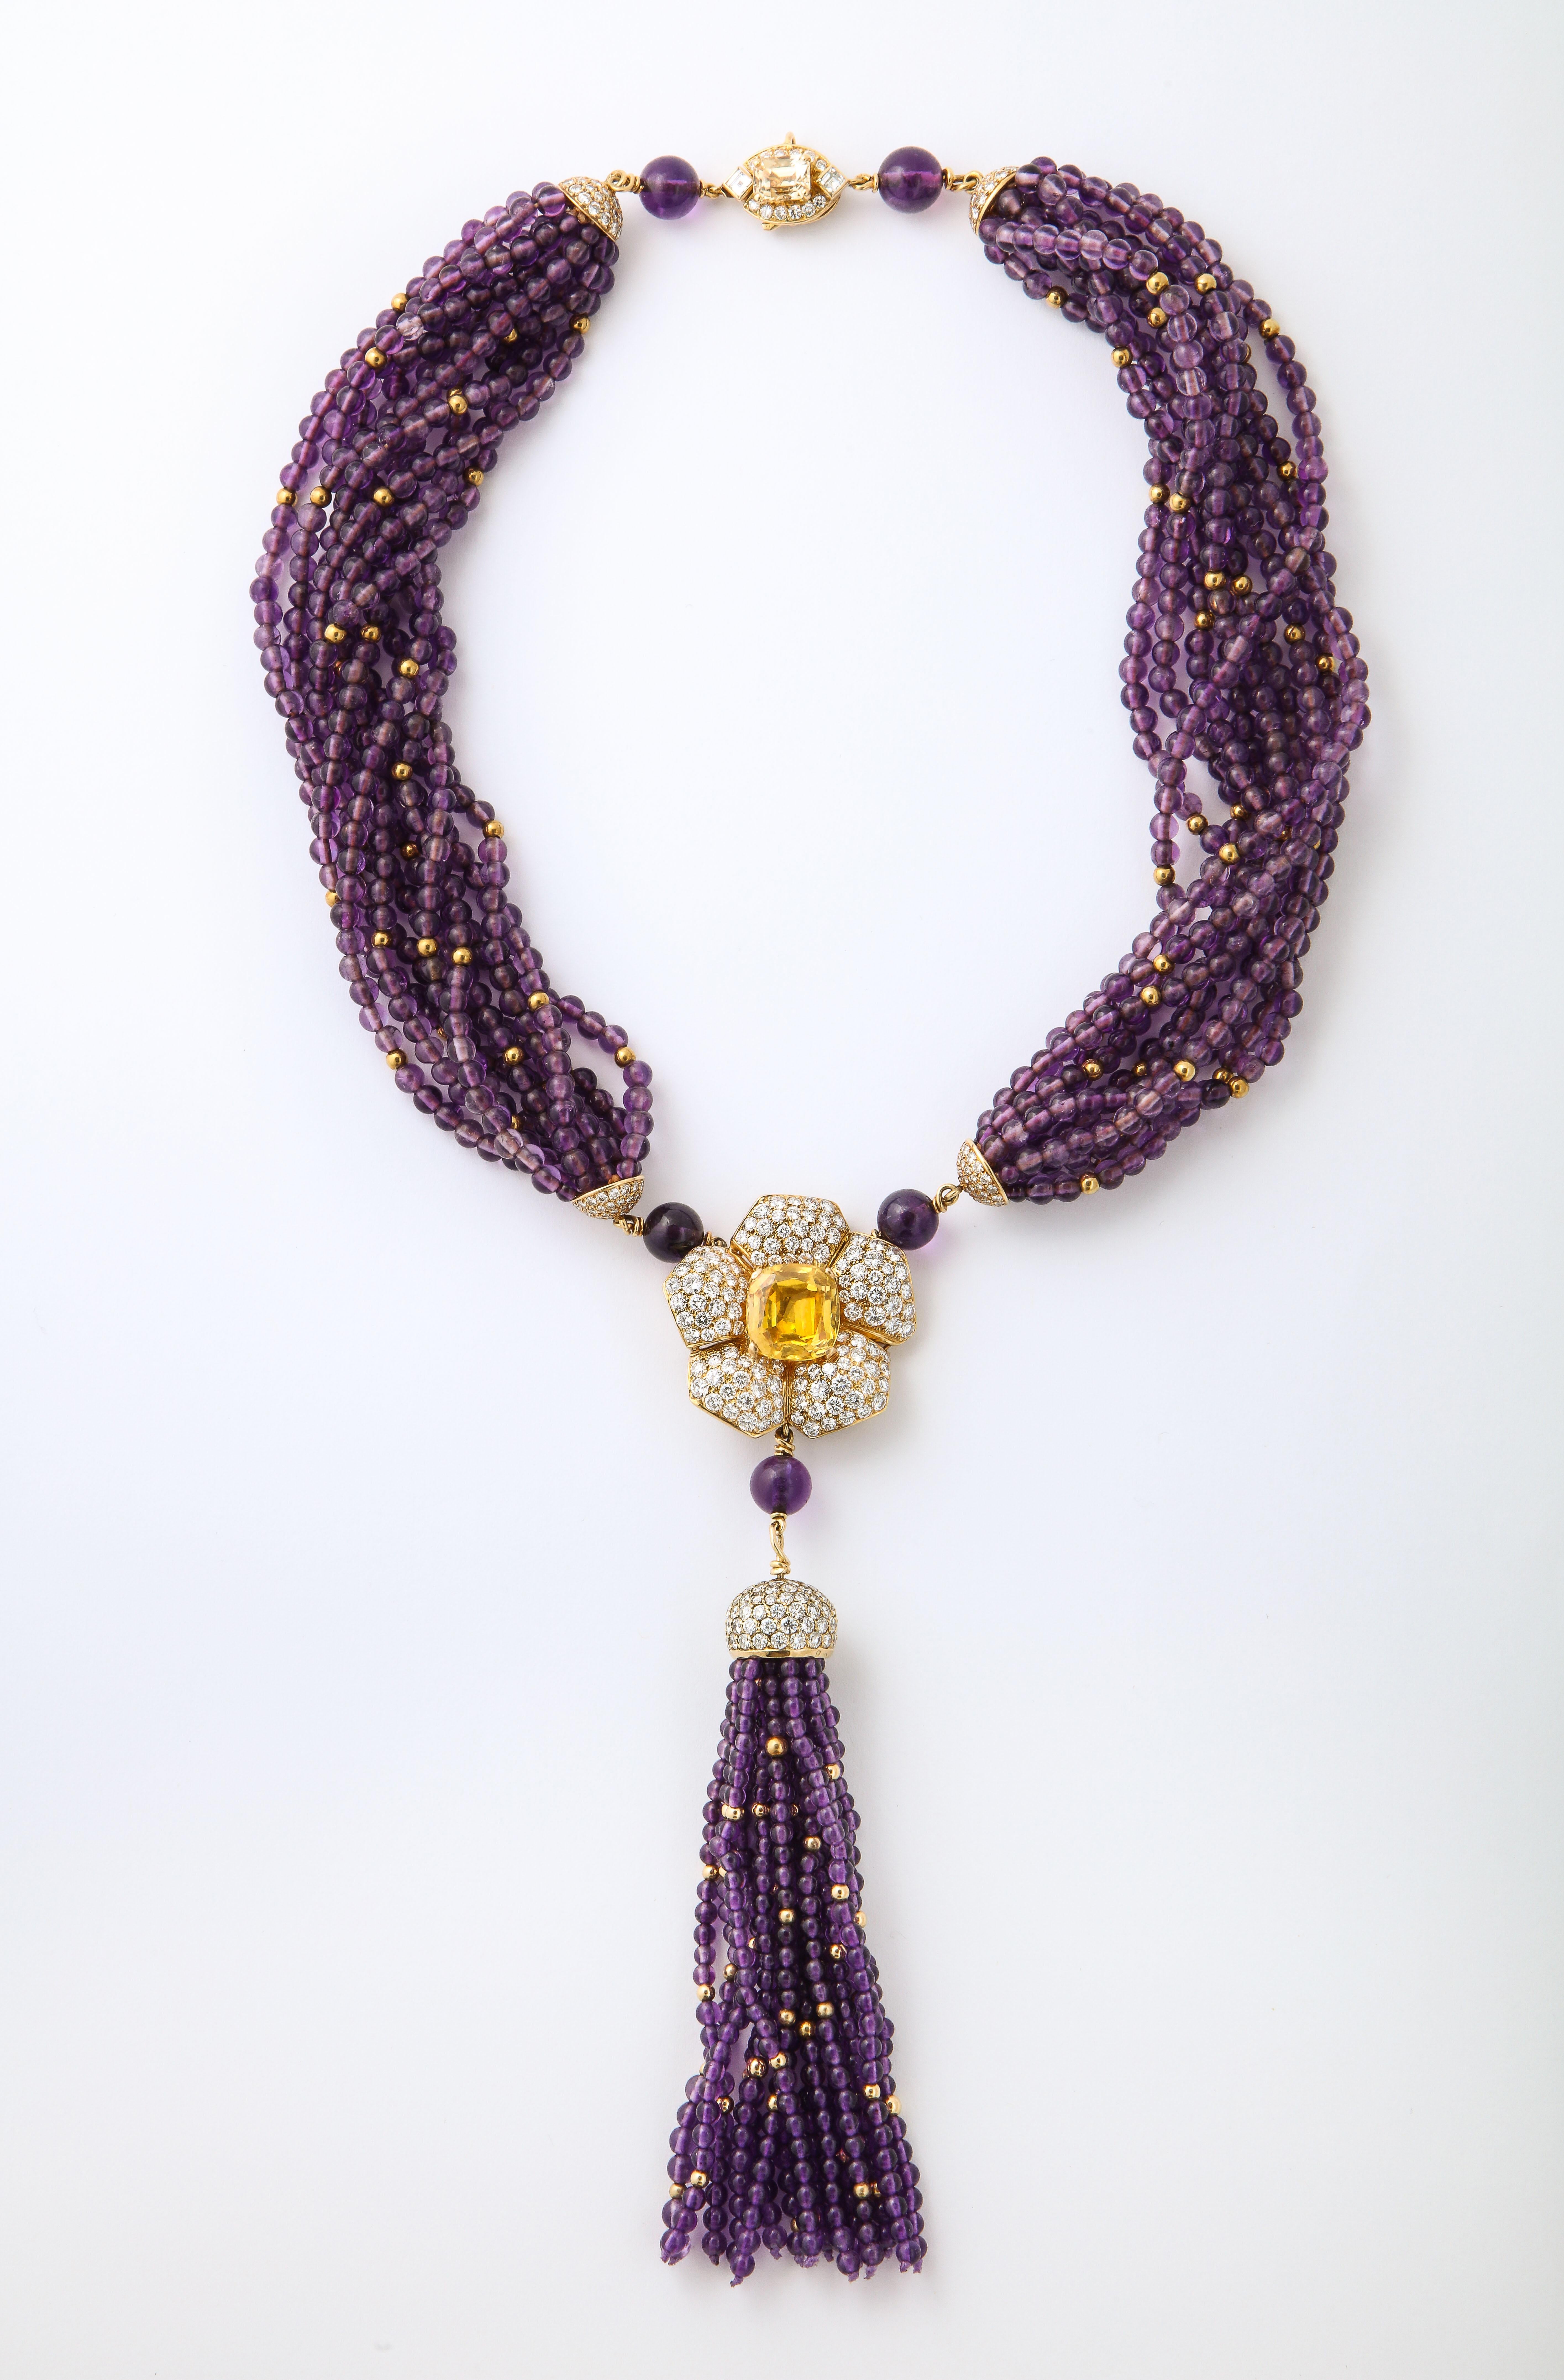 Custom designed amethyst torsade necklace with a detachable tassel pendant.  The center stone in the pendant is a 12.24 carat cushion cut yellow sapphire that is certified by The American Gemological Laboratory to be without any heat treatment and